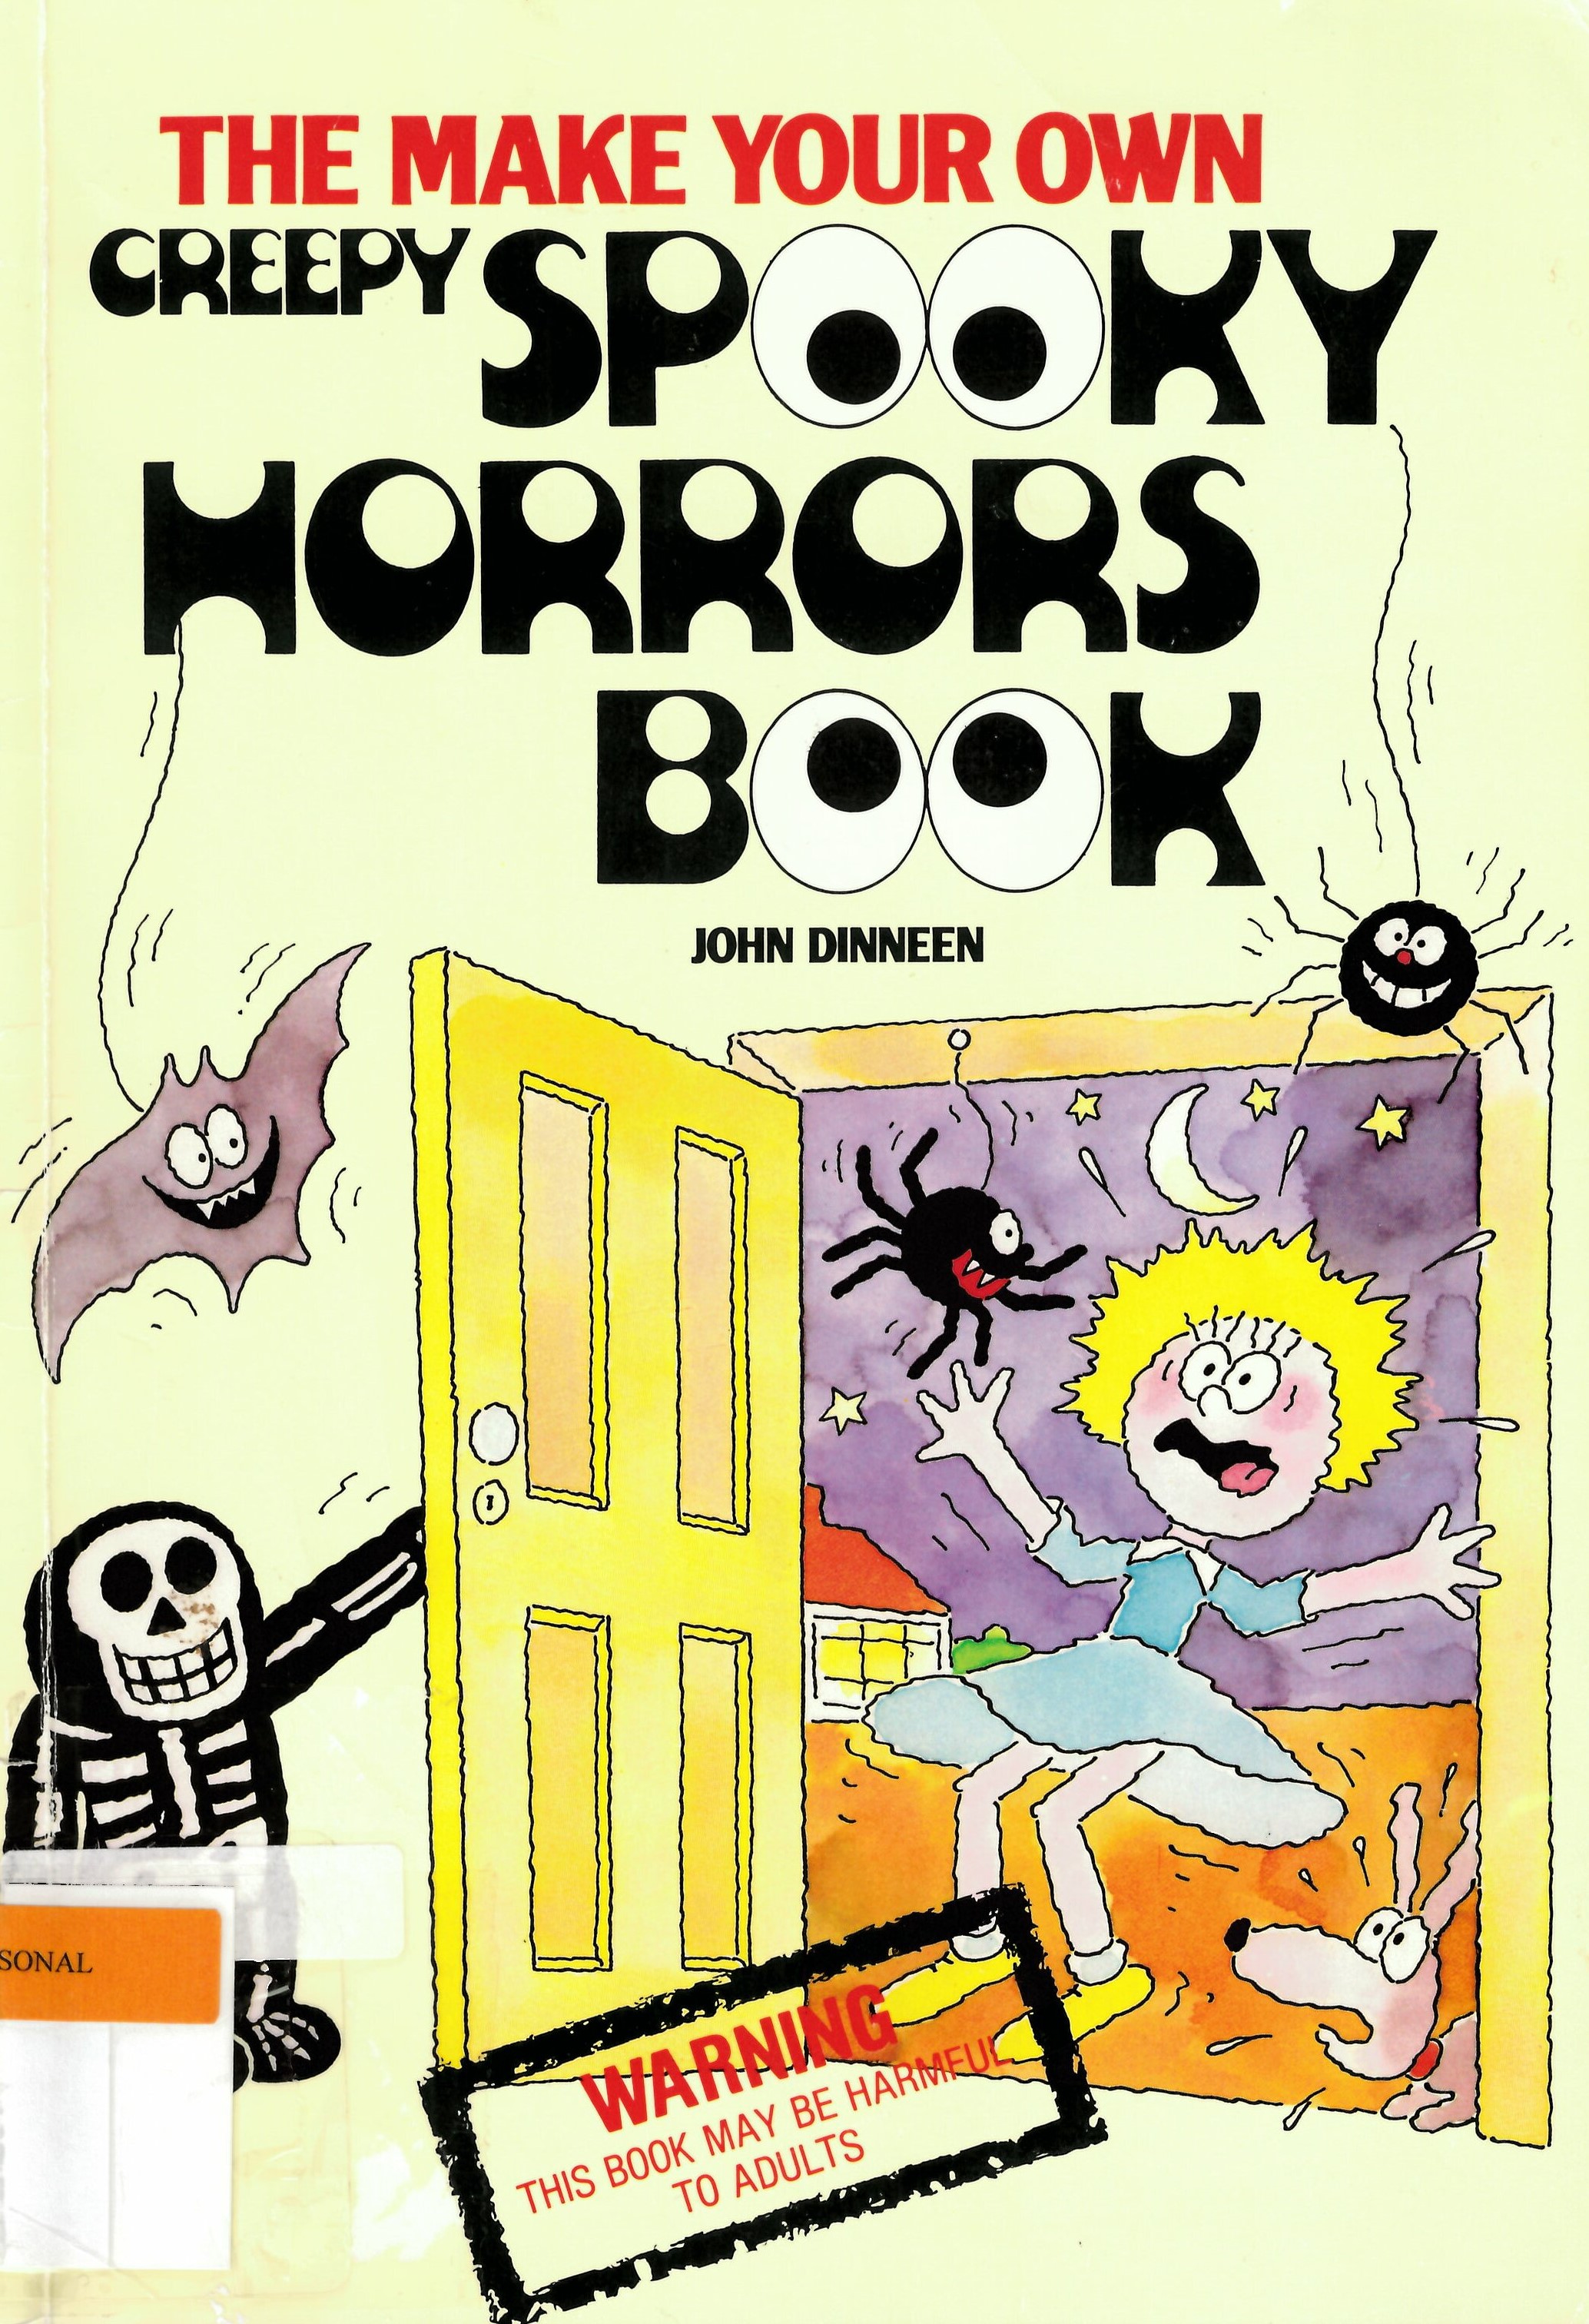 The Make your own creepy spooky horrors book